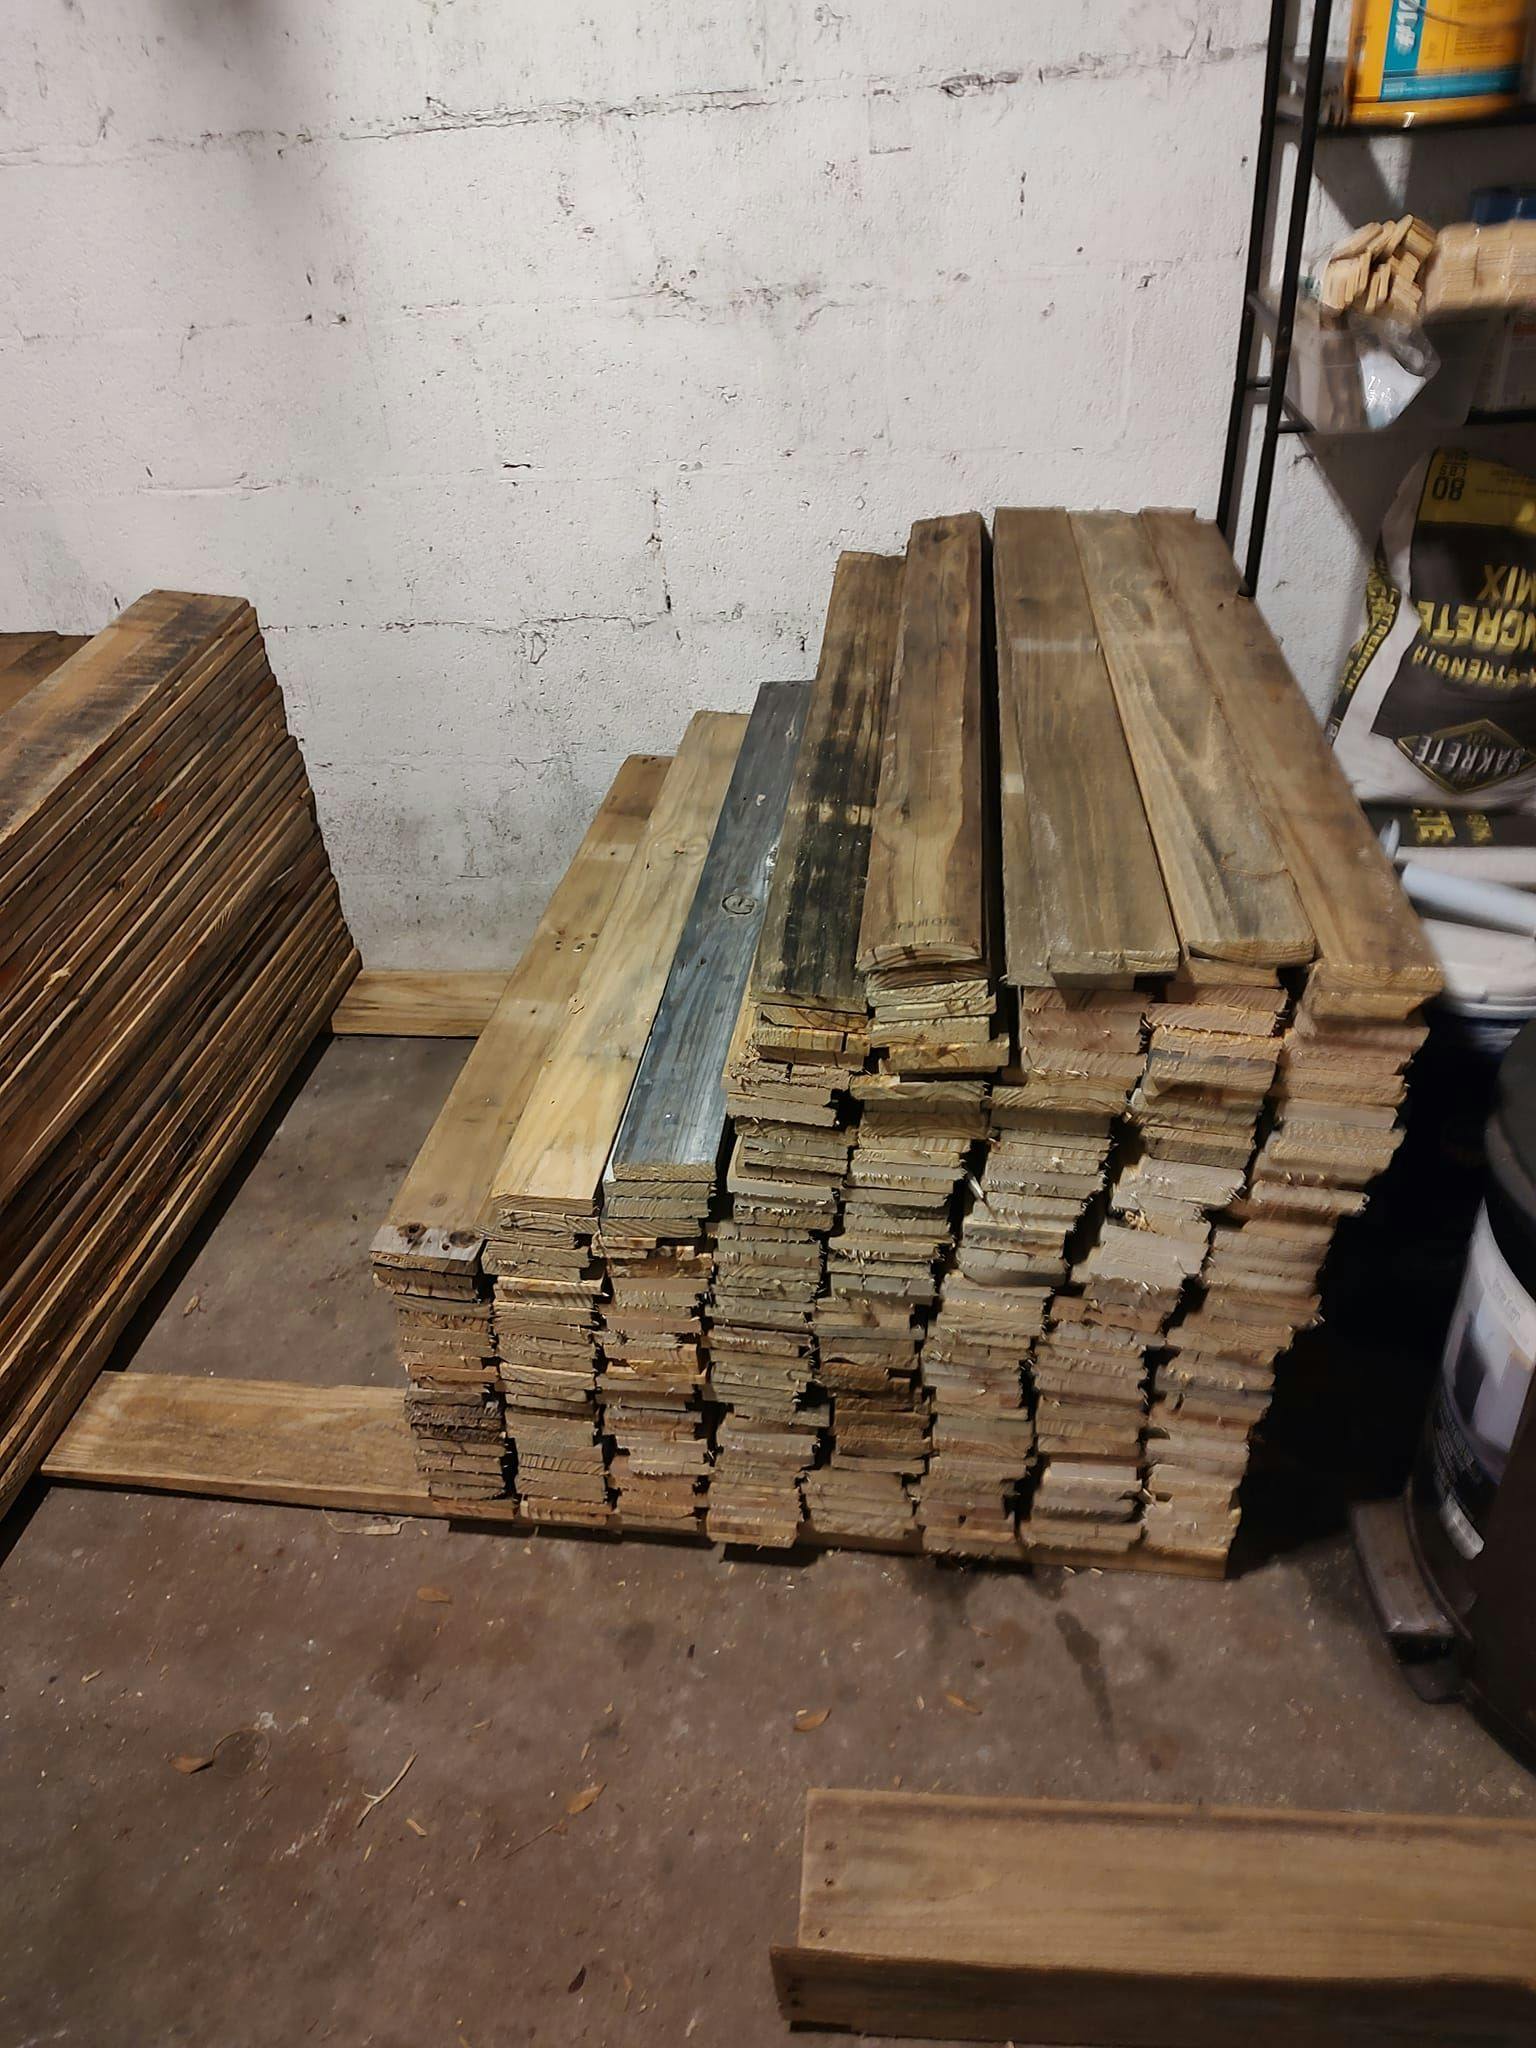 Reclaimed 40 inch Softwood Boards - Compton CA 90221